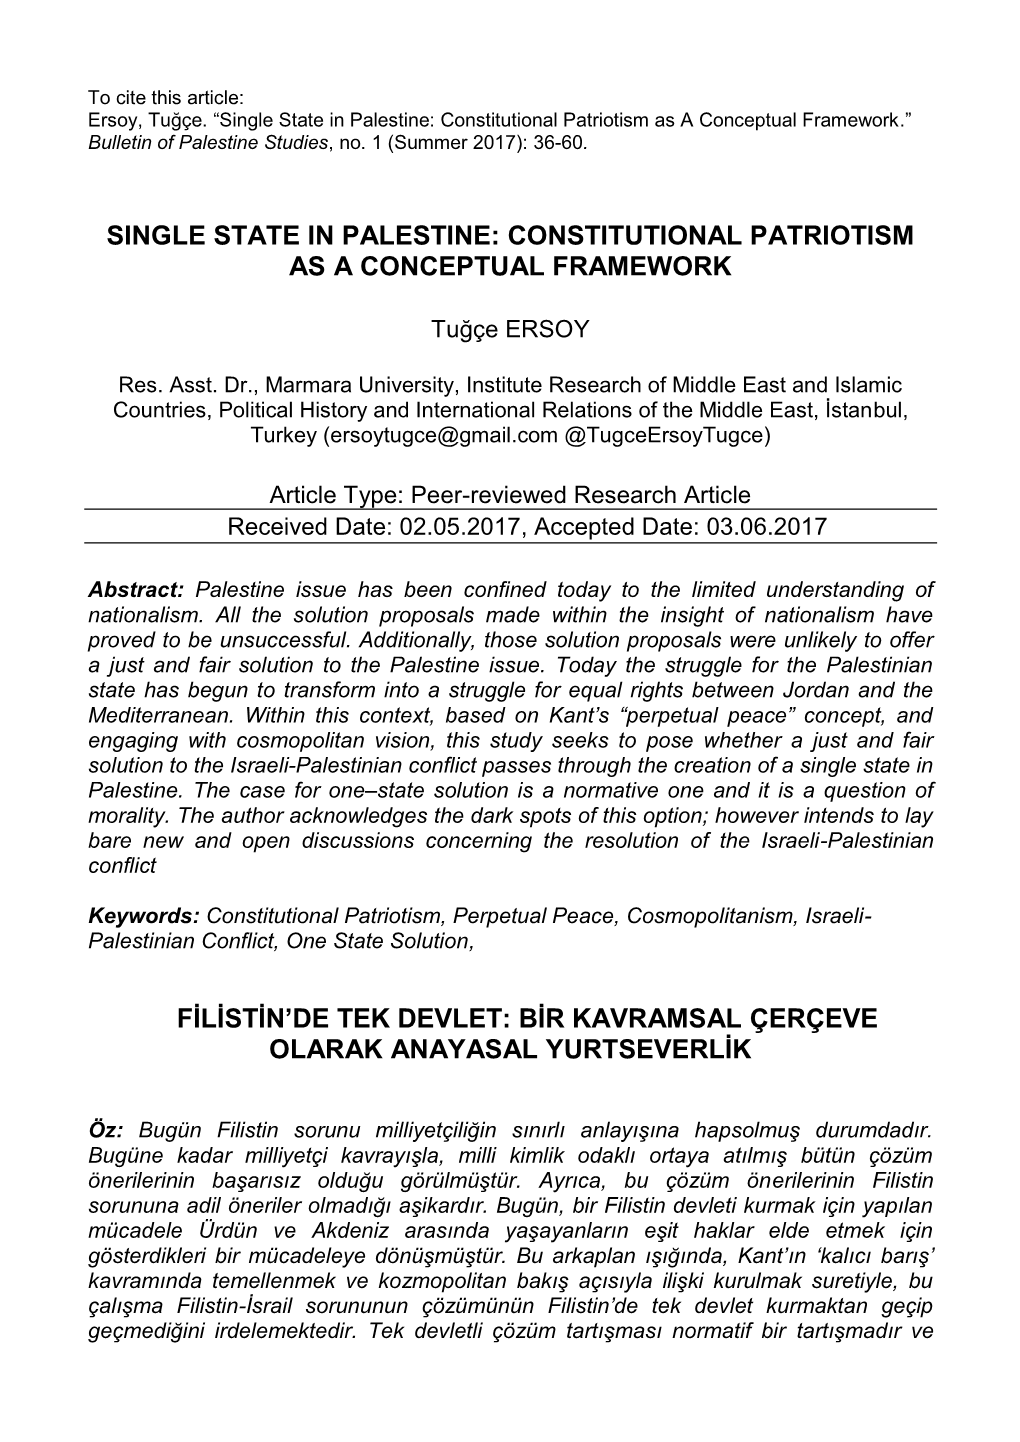 Single State in Palestine: Constitutional Patriotism As a Conceptual Framework.” Bulletin of Palestine Studies, No